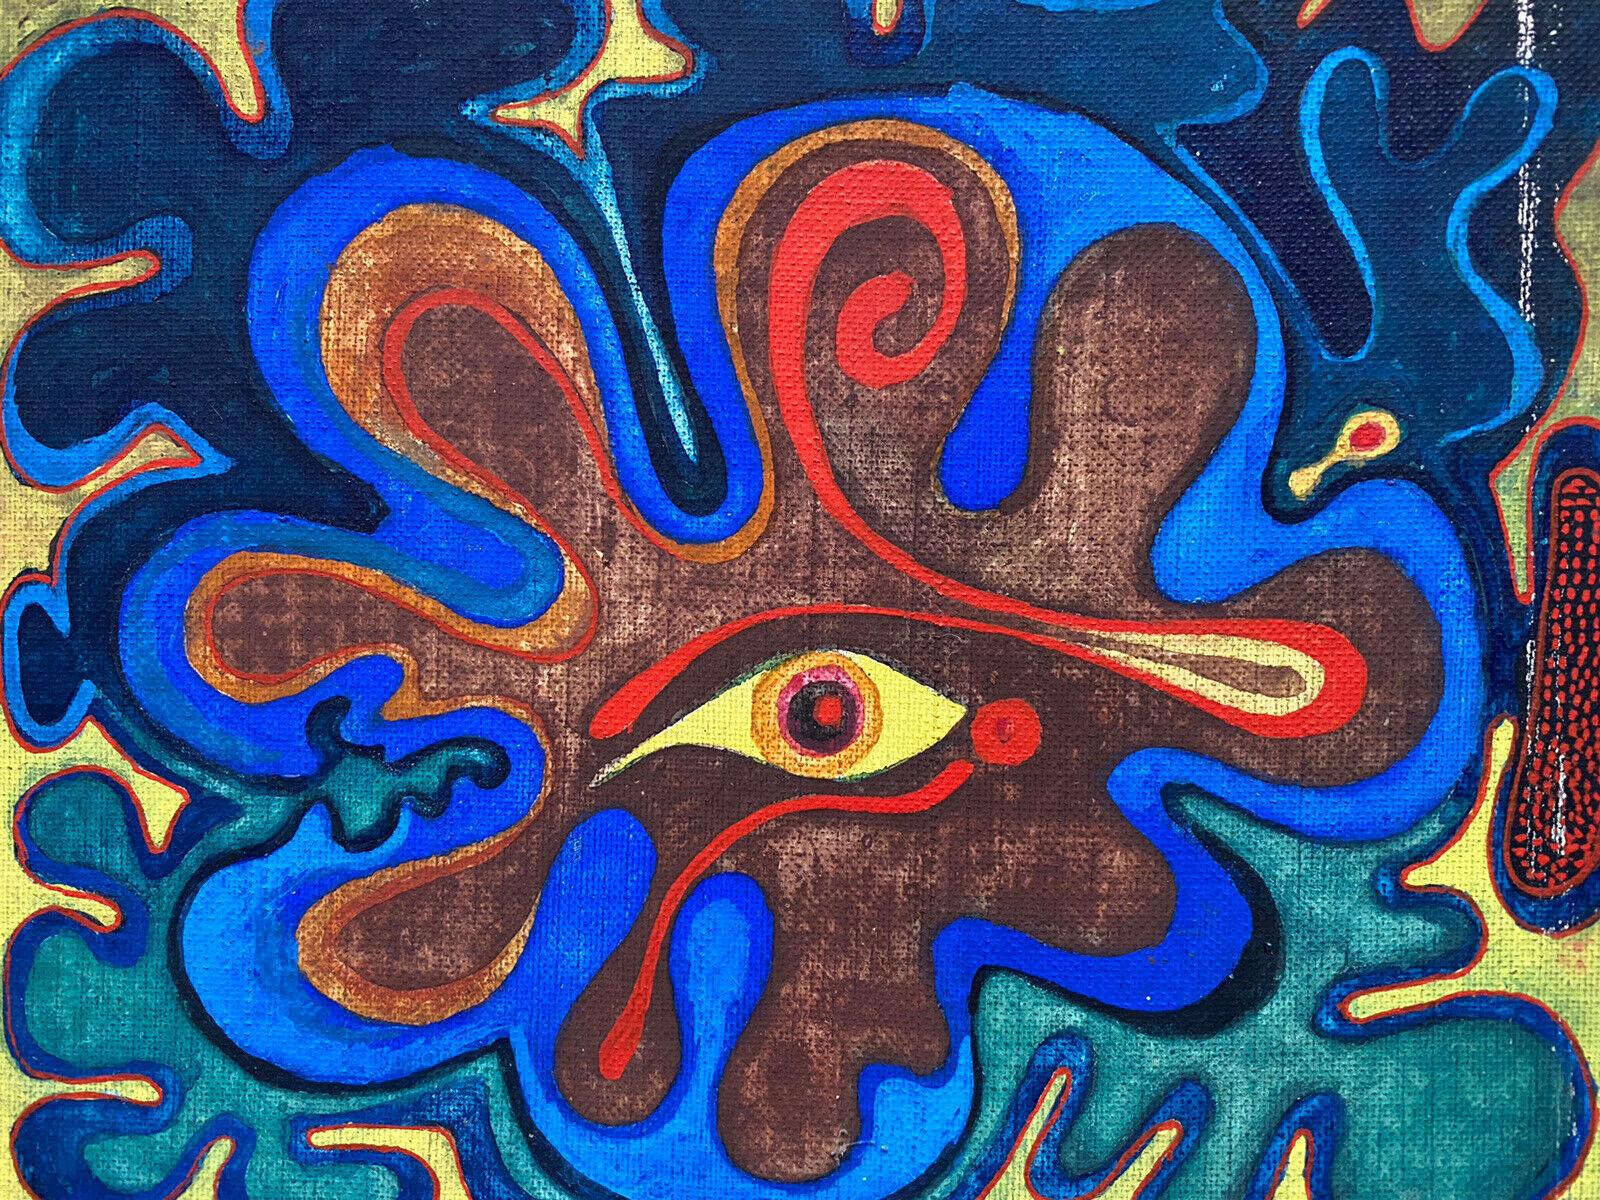 Claude Lagouche Abstract Painting - ORIGINAL 1970'S FRENCH PSYCHEDELIC PAINTING - ABSTRACT EYE